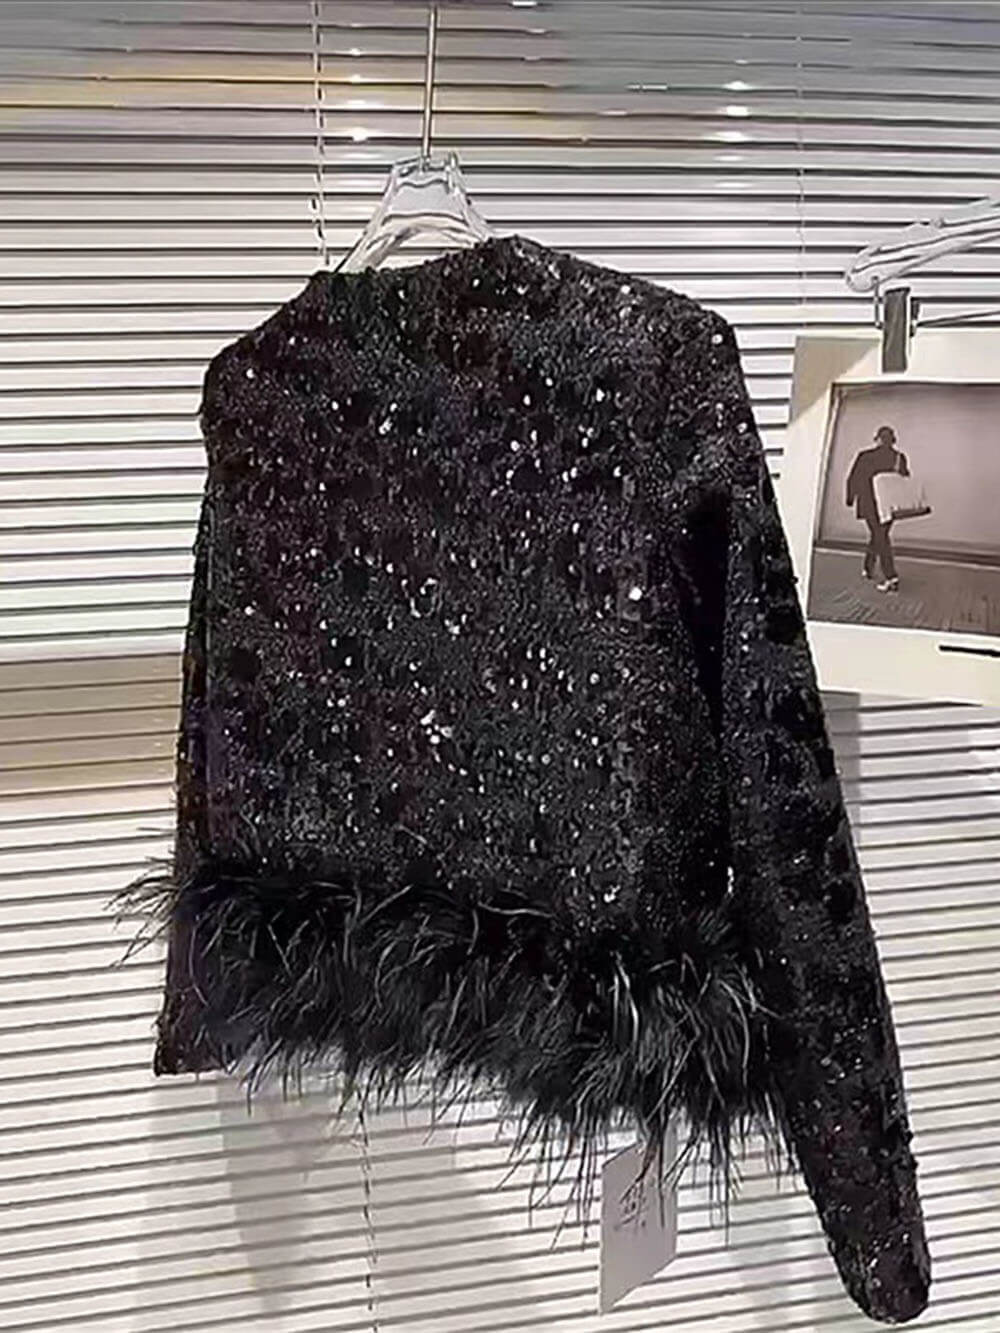 Black Sequins Jacket With Feathers